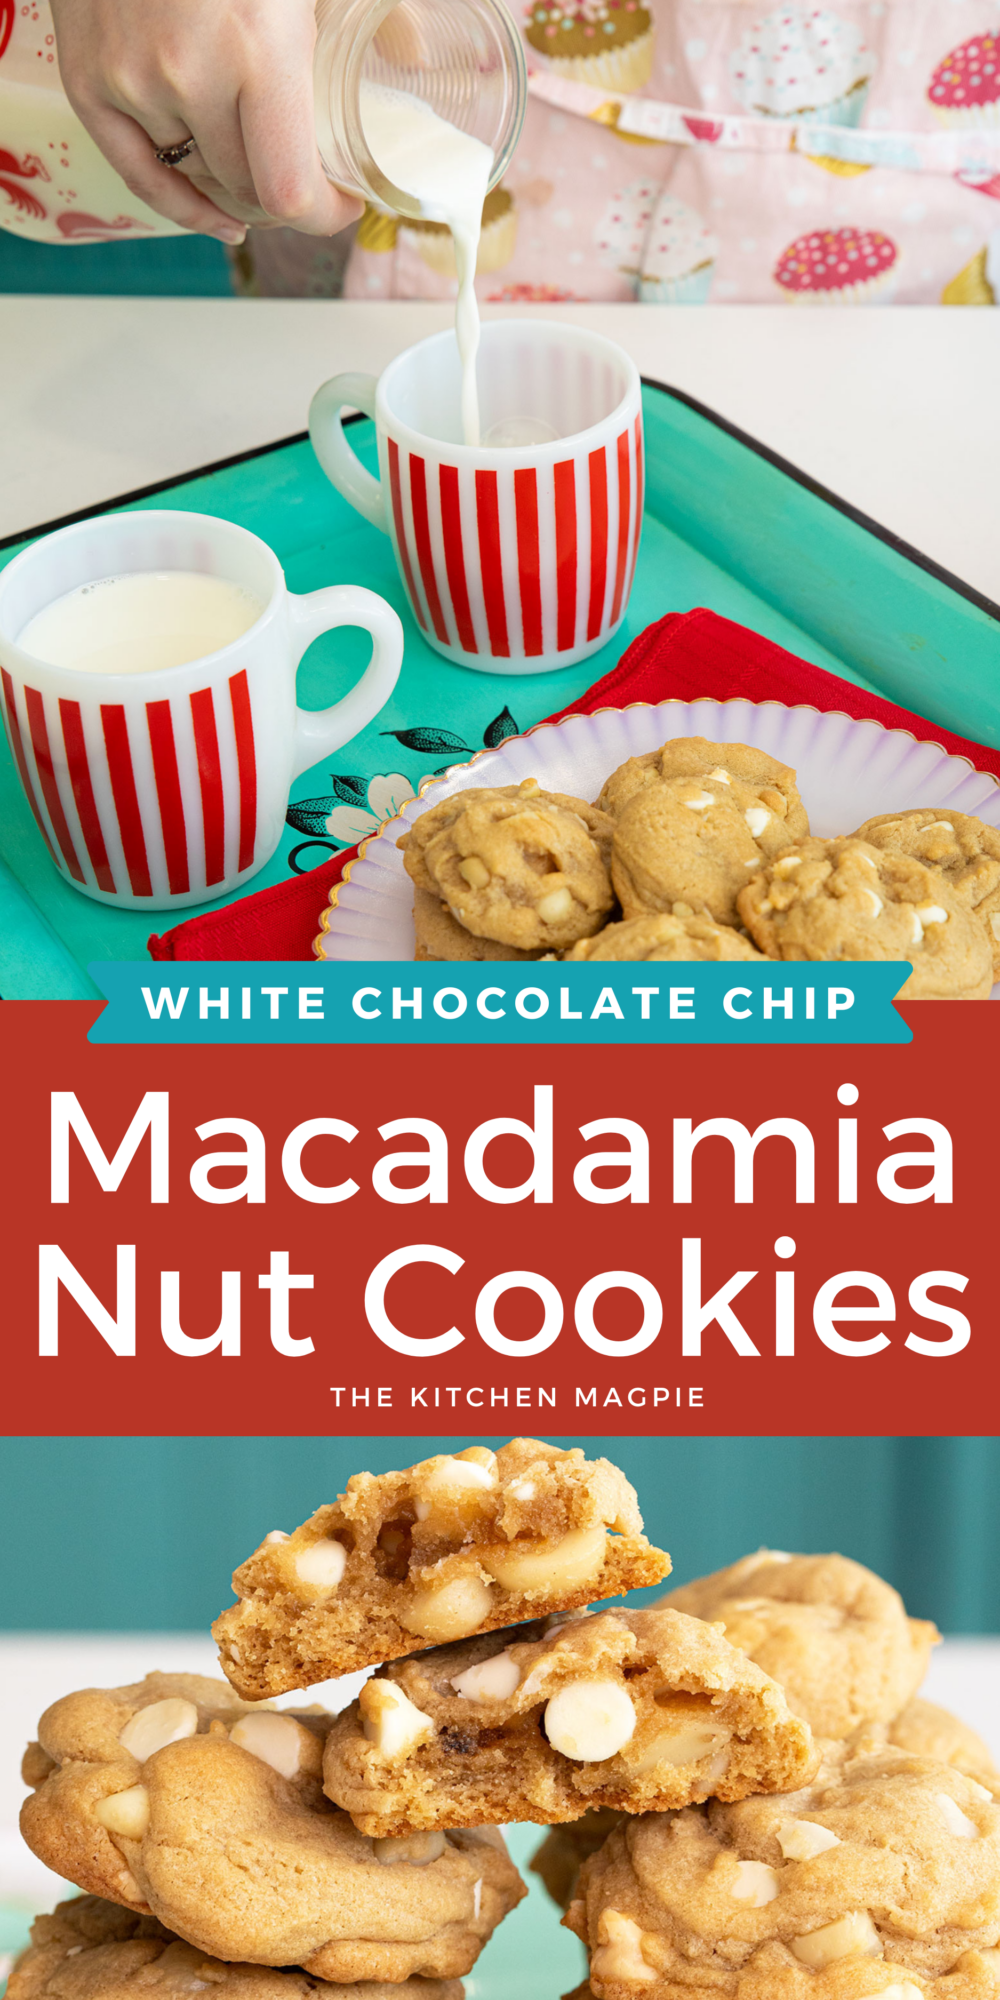 Nothing beats a white chocolate chip macadamia nut cookie for a treat. These buttery, chewy, and utterly decadent cookies are a must-bake!